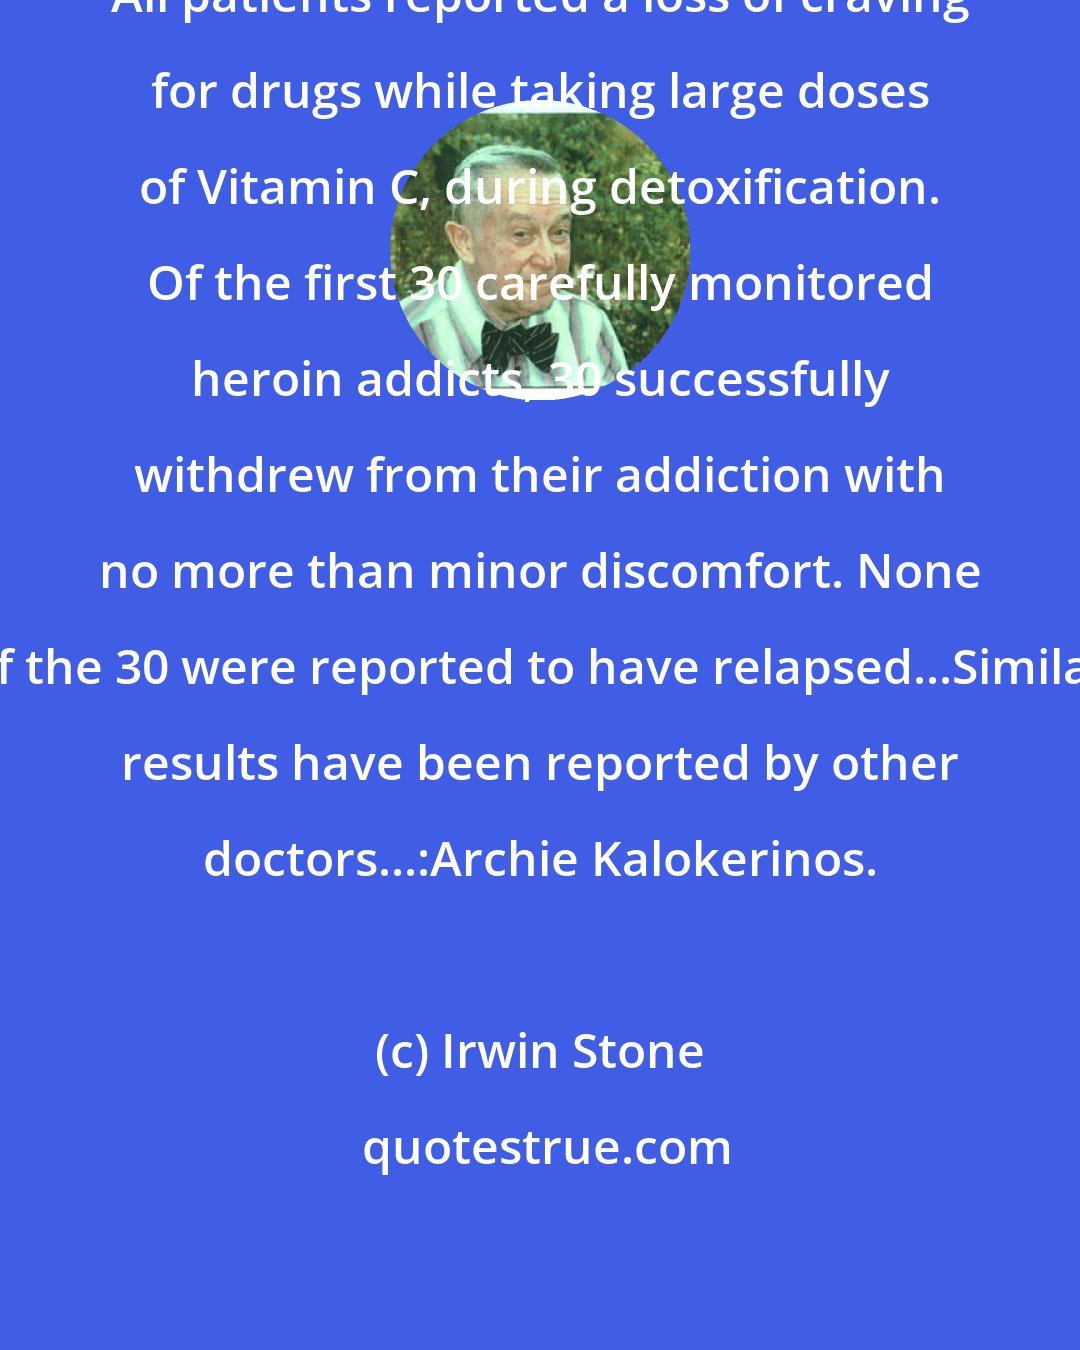 Irwin Stone: All patients reported a loss of craving for drugs while taking large doses of Vitamin C, during detoxification. Of the first 30 carefully monitored heroin addicts, 30 successfully withdrew from their addiction with no more than minor discomfort. None of the 30 were reported to have relapsed...Similar results have been reported by other doctors...:Archie Kalokerinos.